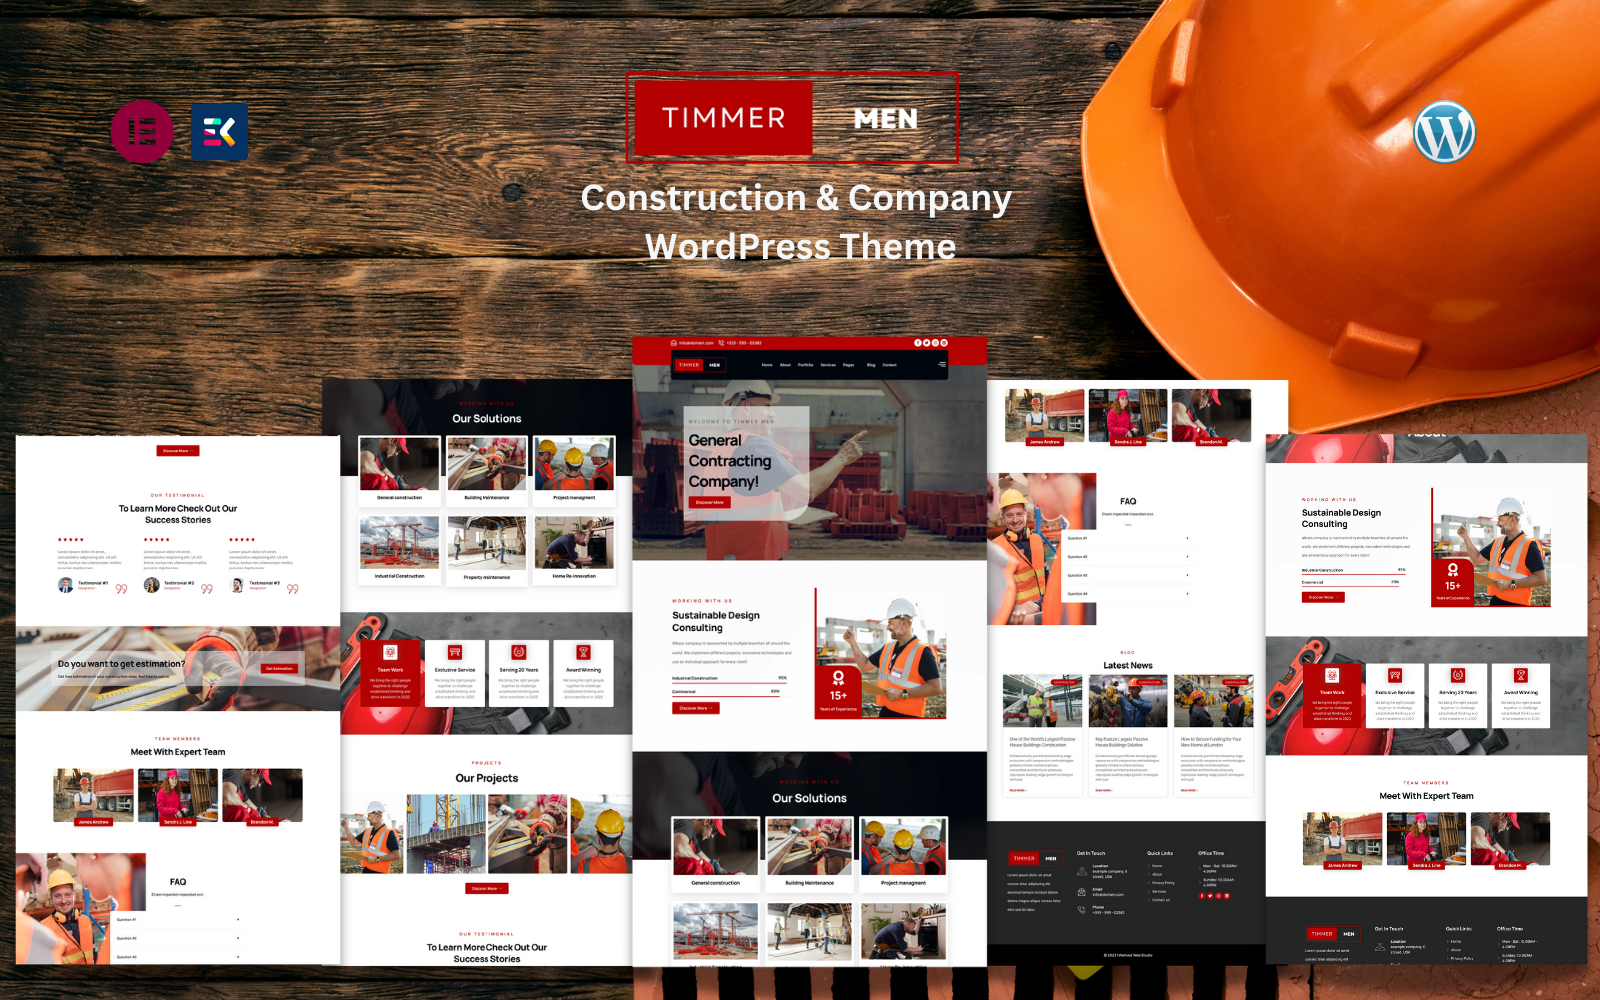 Timmer Men - Construction and Company WordPress Theme